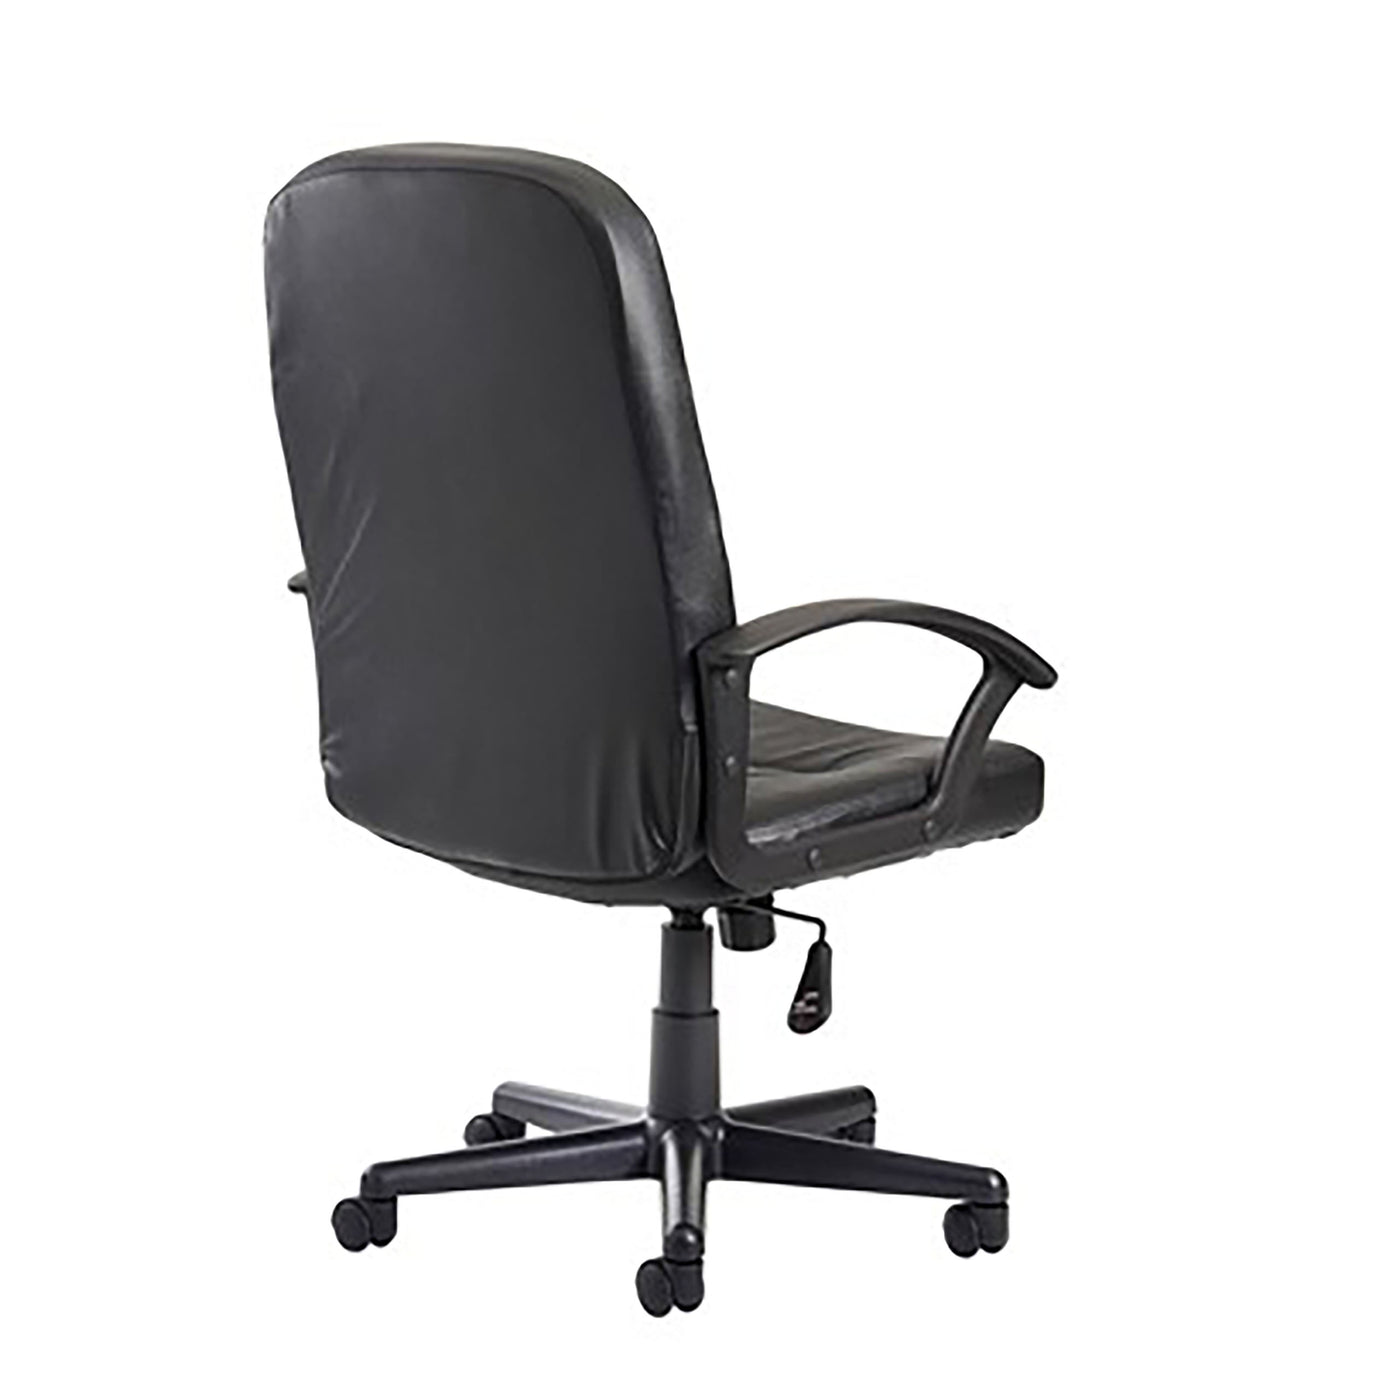 Cavalier Black Faced Leather Chair | Home Office Furniture | Ergonomic Furniture | Home Office Furnishings